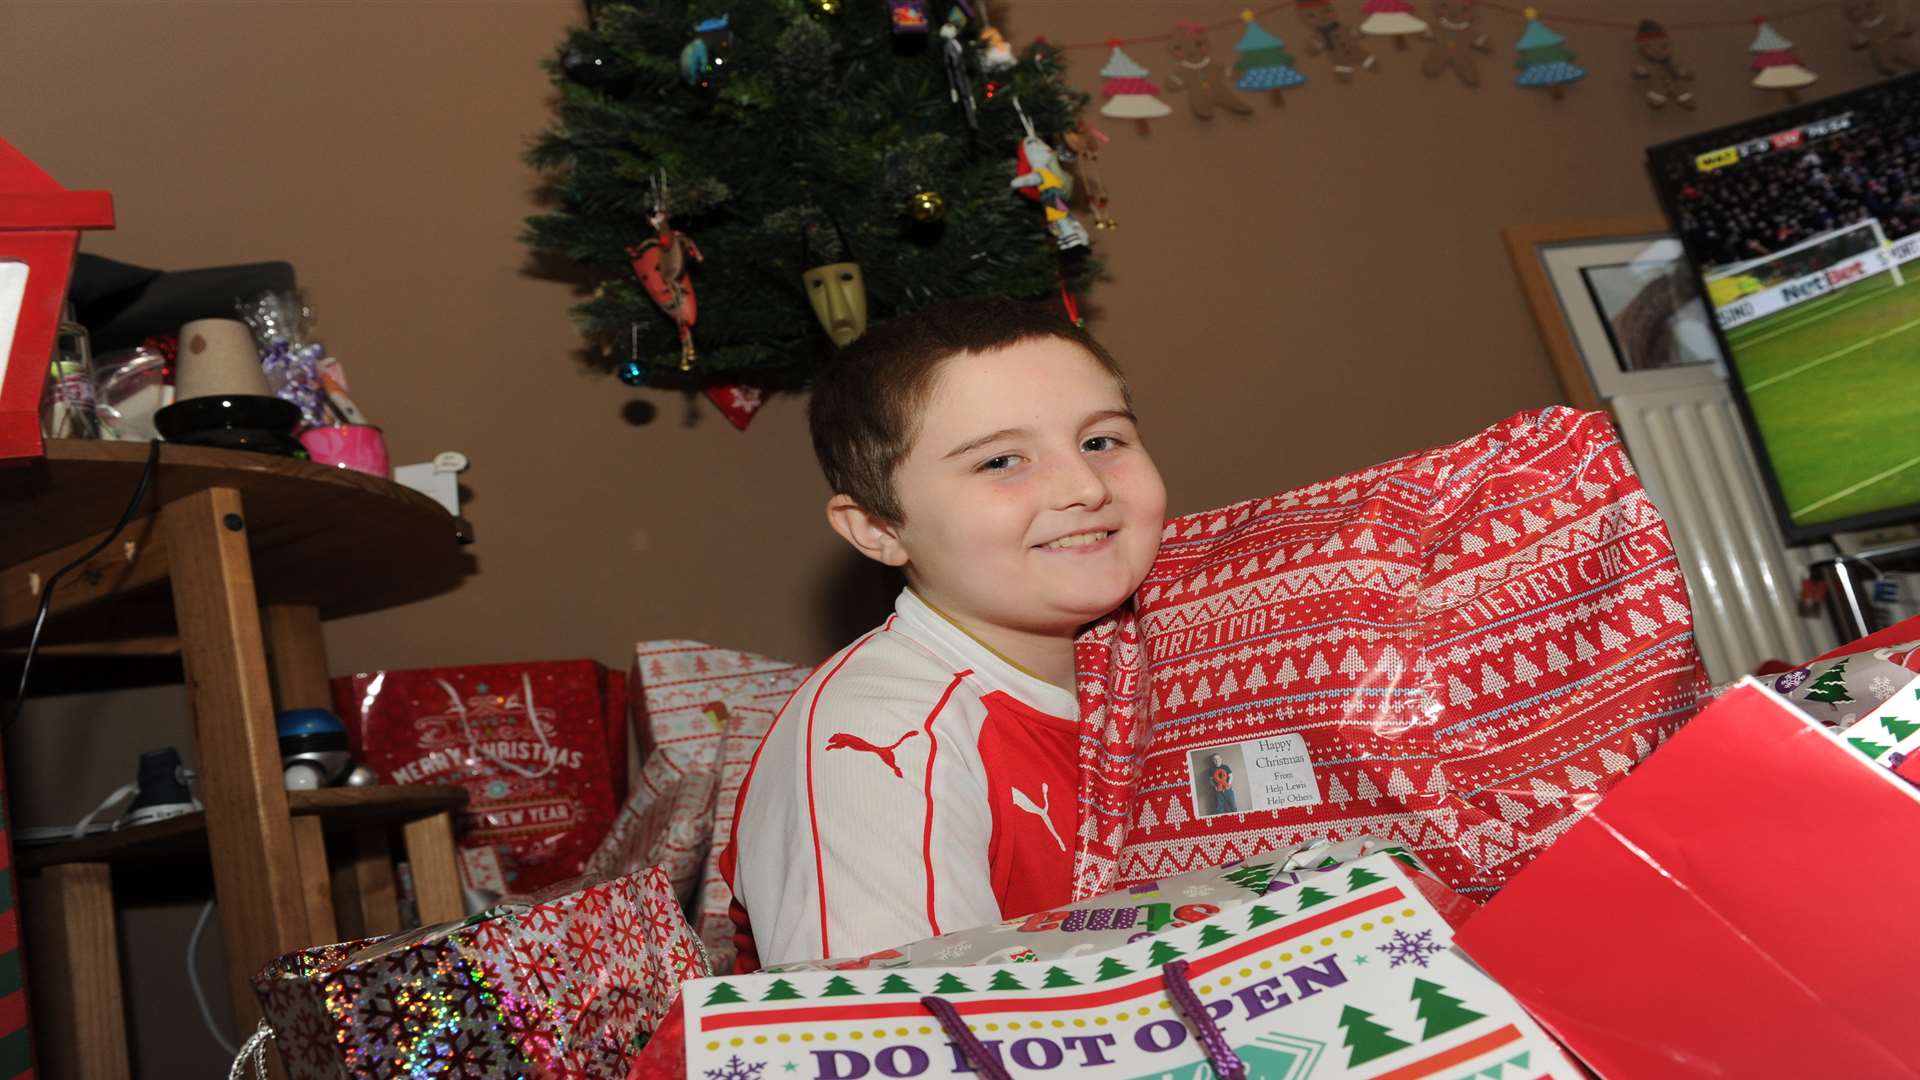 The 10-year-old spent last Christmas in hospital with leukaemia.